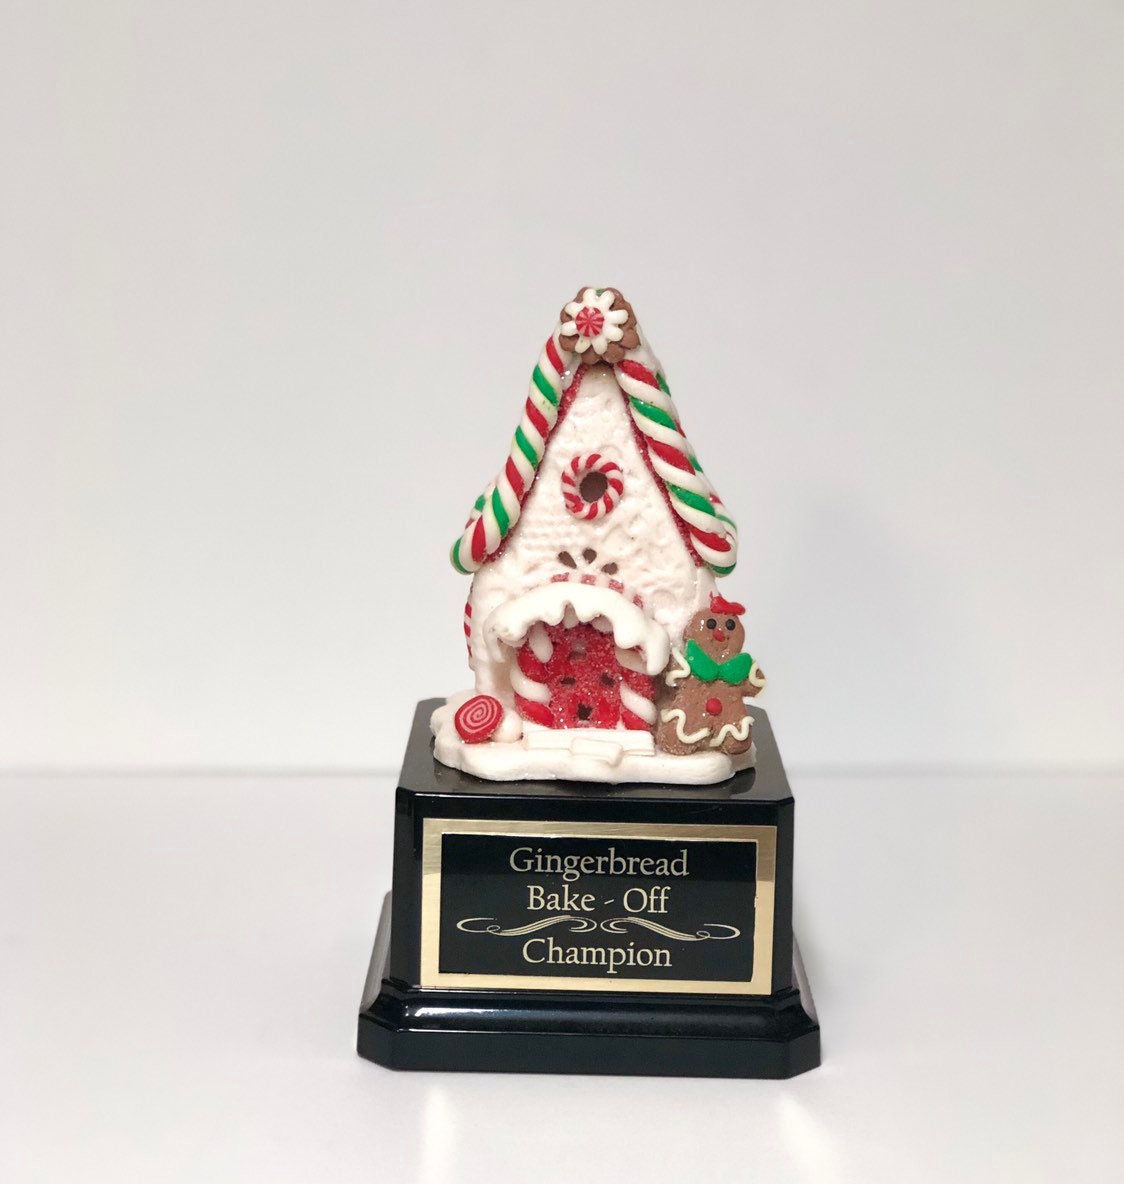 Gingerbread House Decorating Contest Cookie Bake Off Trophy Ugly Sweater Trophy Gingerbread Man Christmas Cookie Christmas Decor